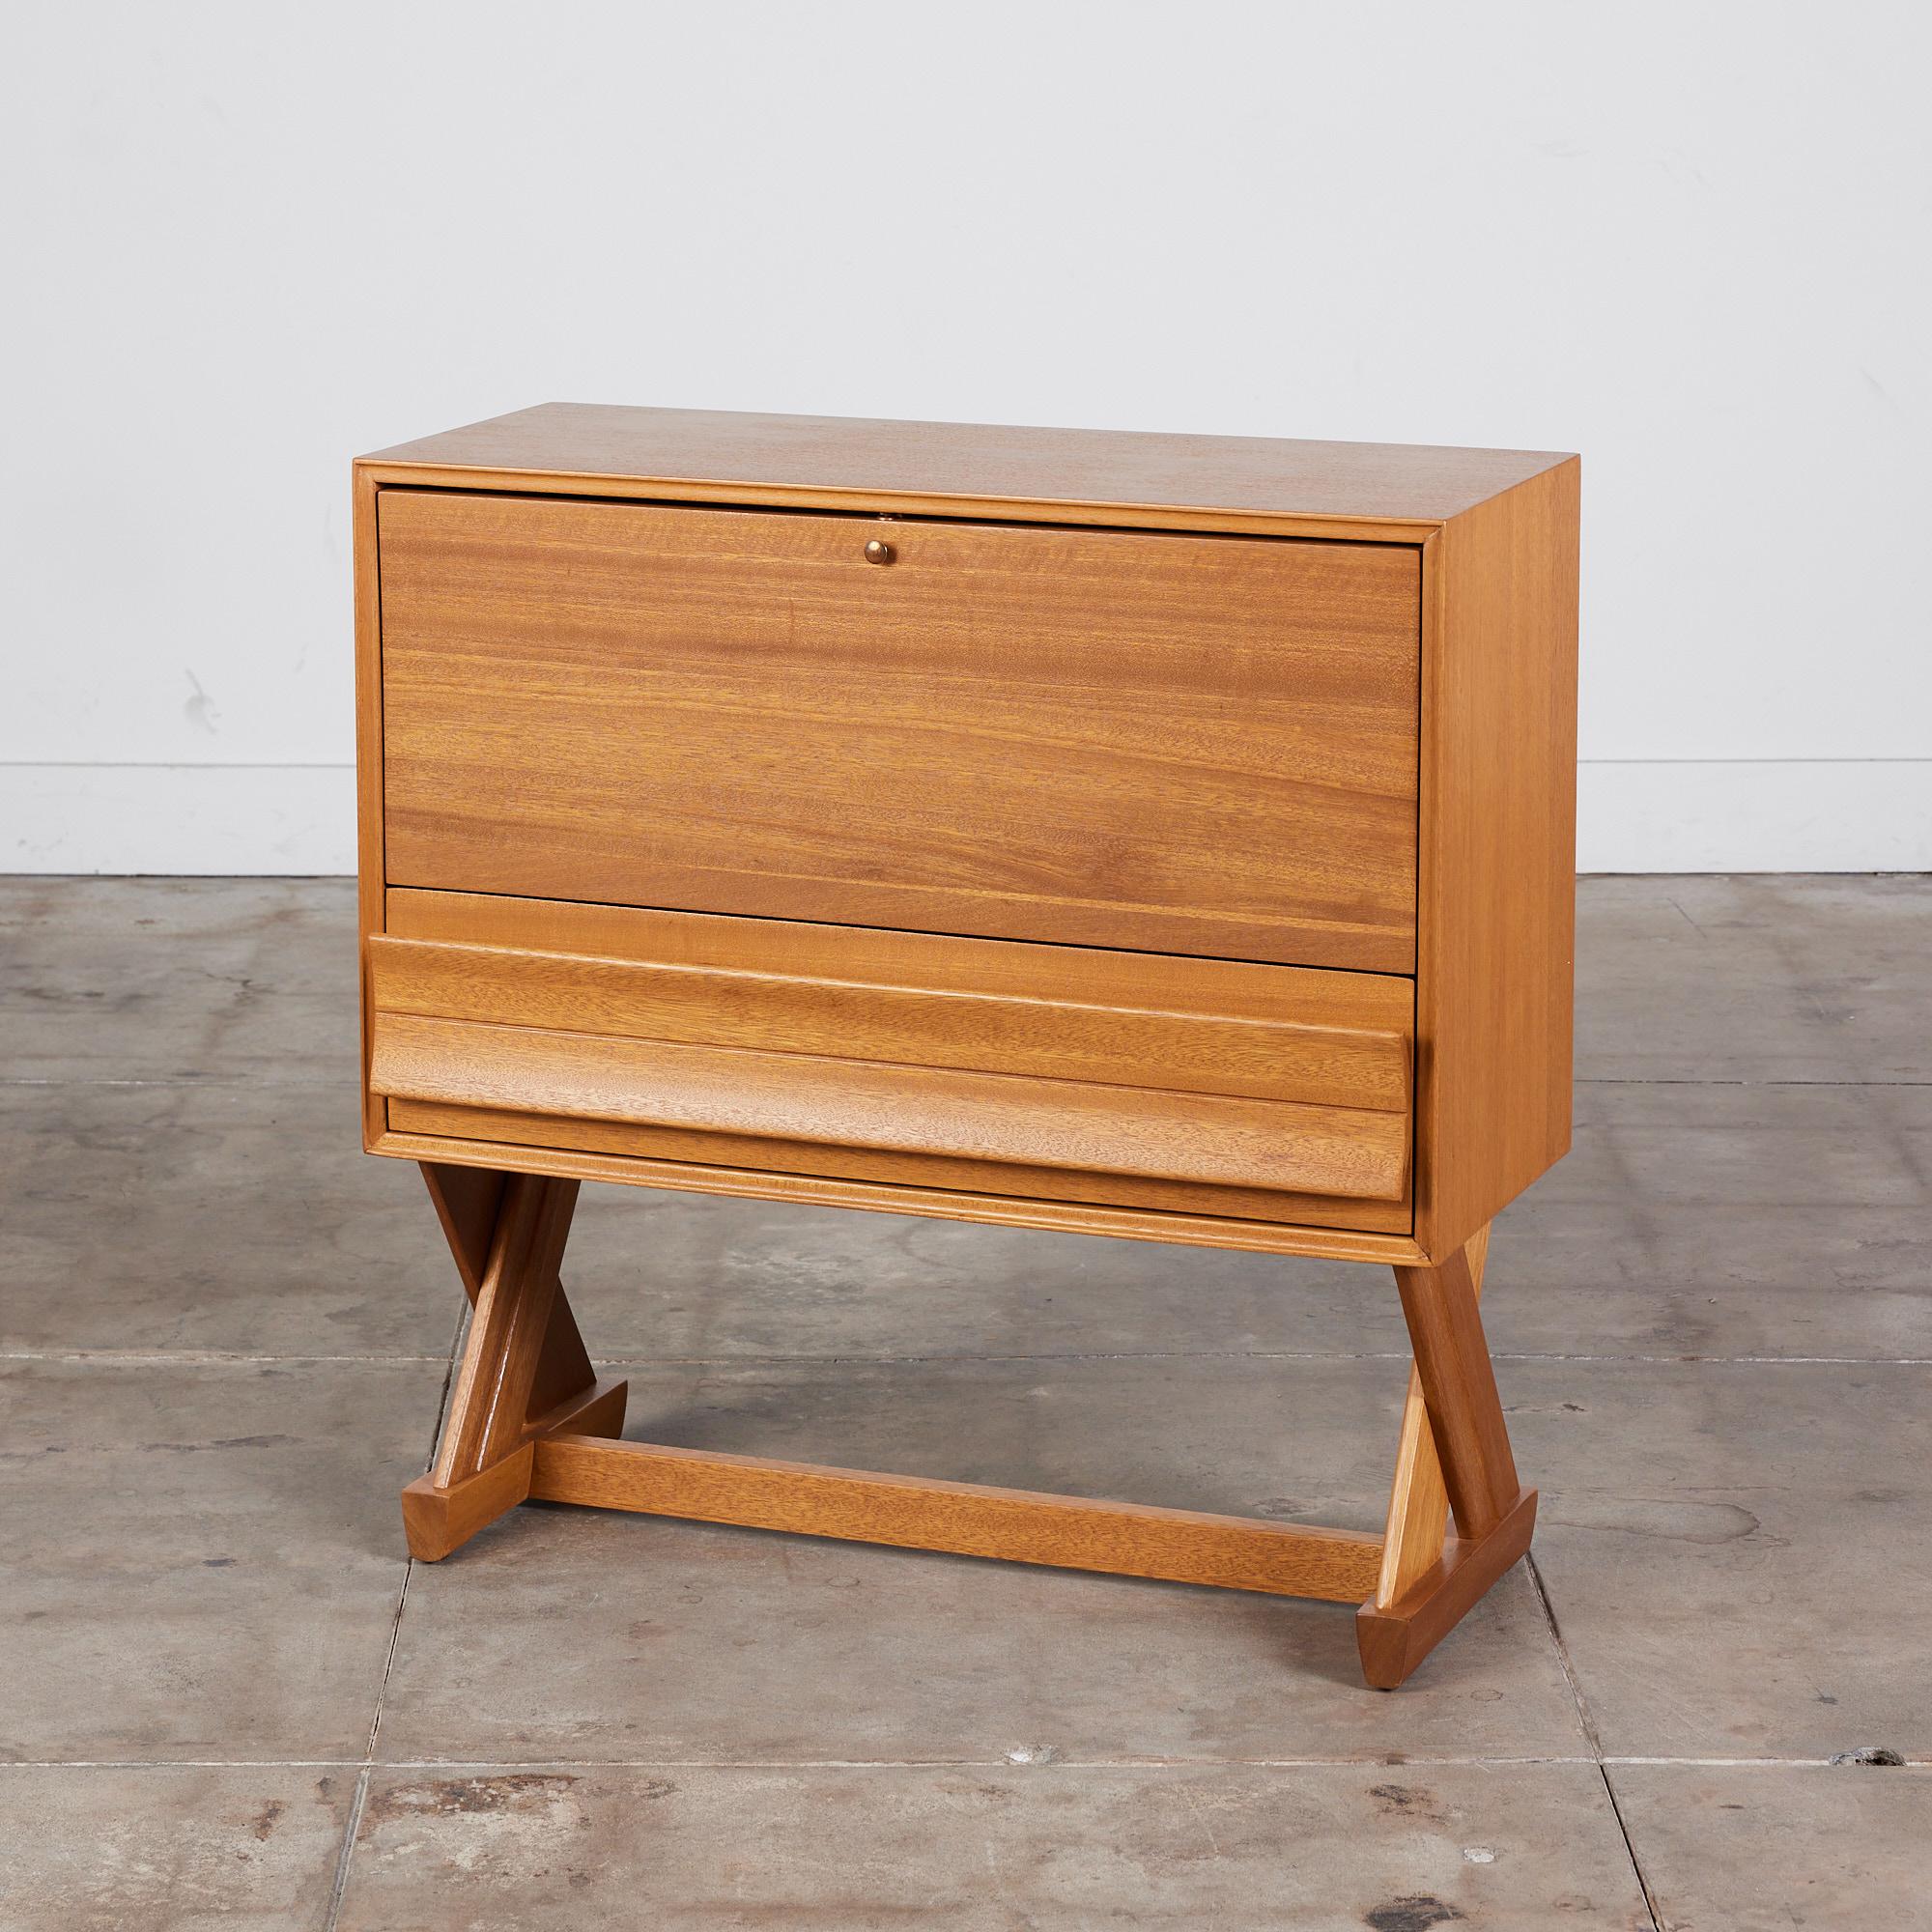 Bar cabinet by Paul Laszlo for Brown Saltman, c.1957. This cabinet features a mahogany body and X-shaped legs with a pull down front. The top portion features vertical separation and lower storage drawer. The front panel drops down and can be used